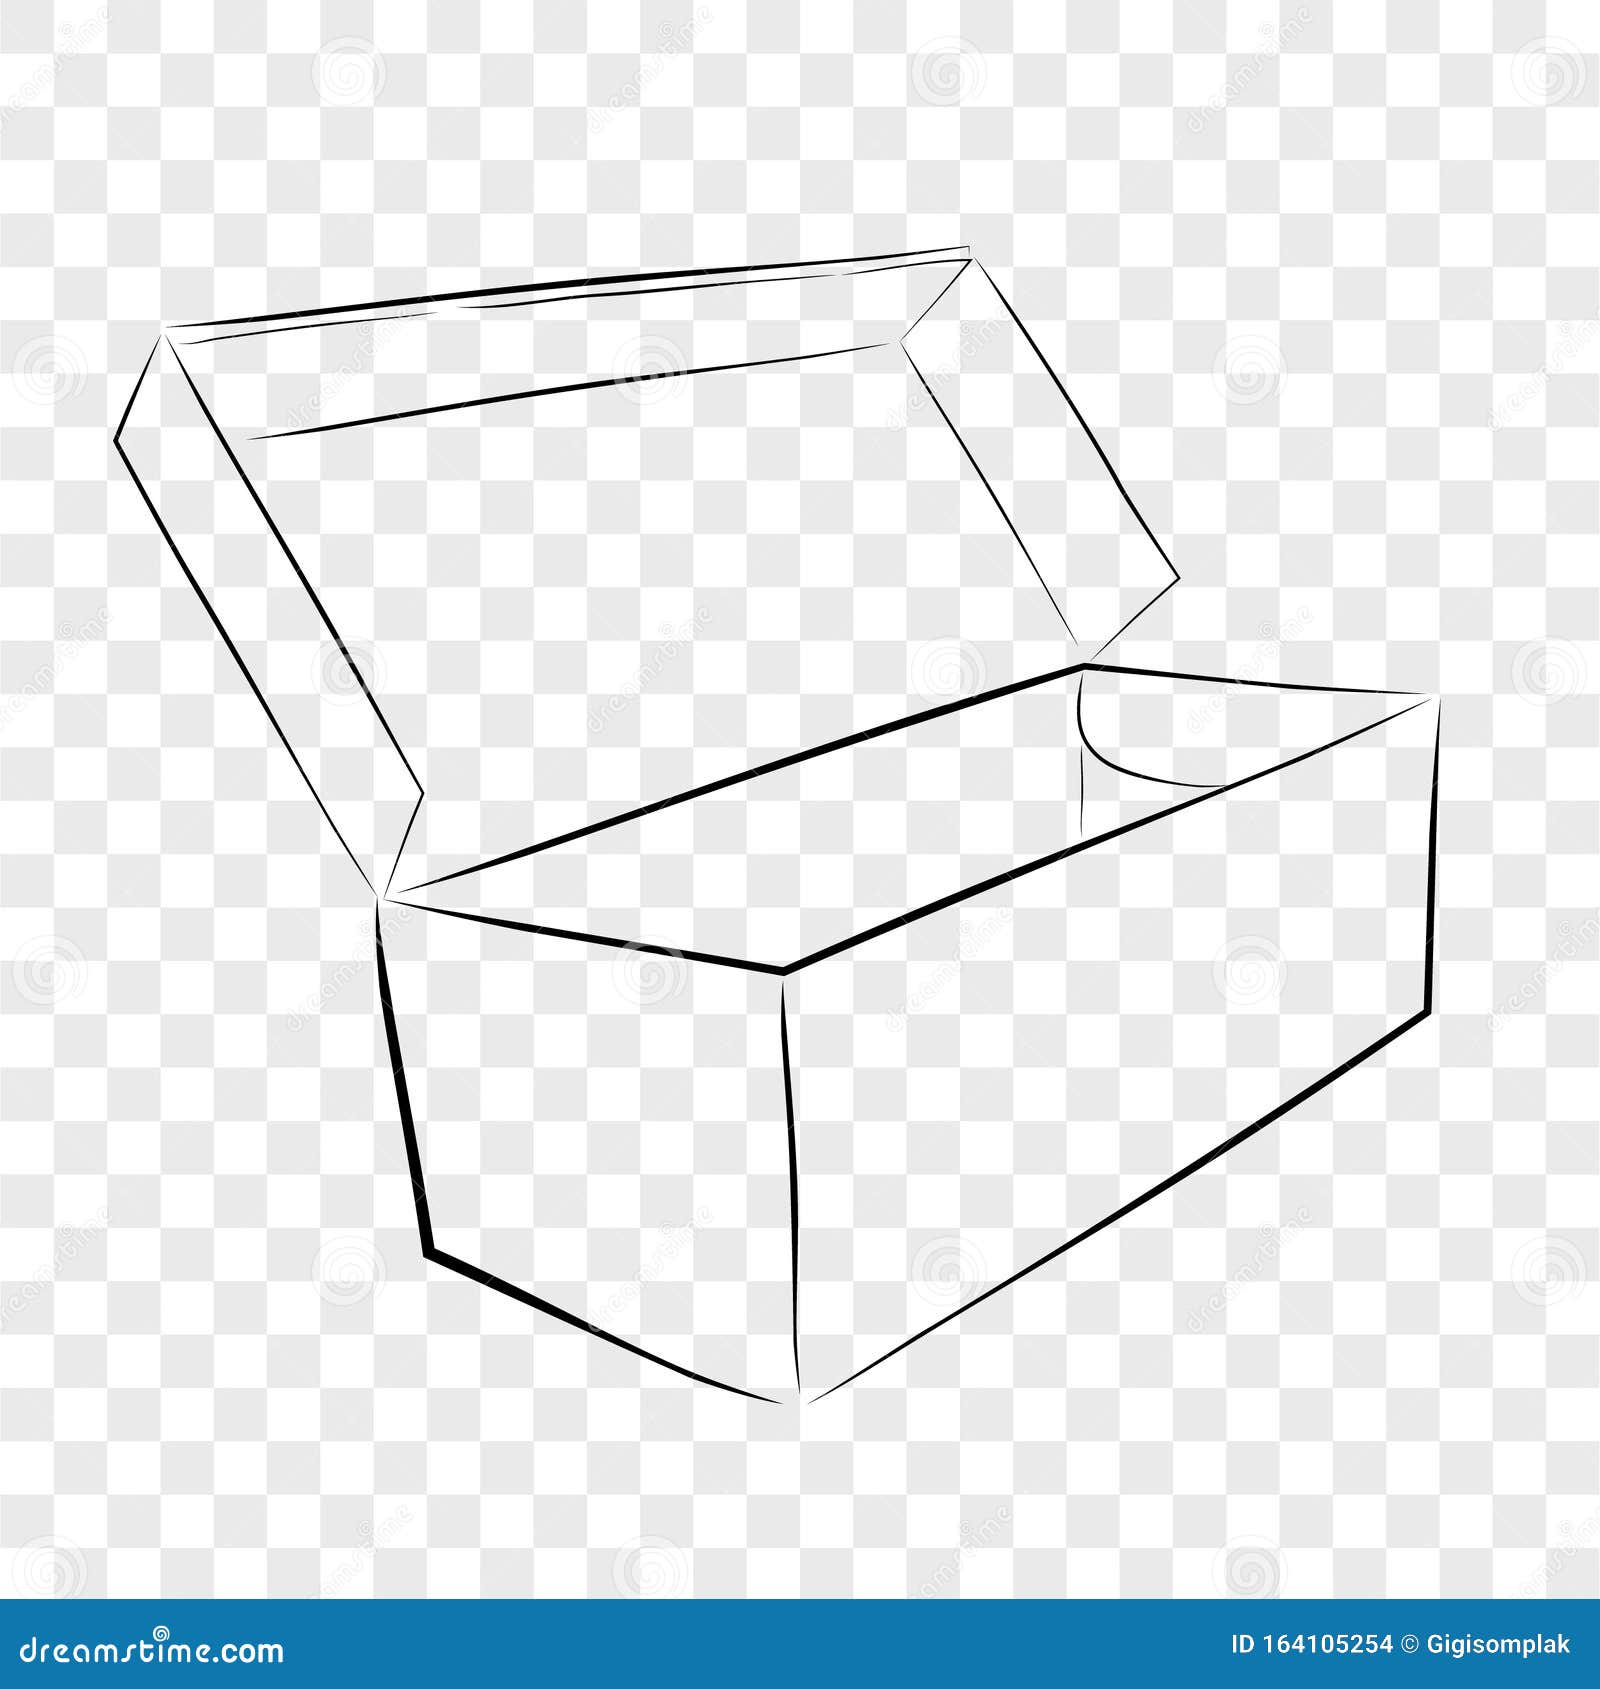 Simple Hand Draw Sketch Template Vector Black Shoe Box, At